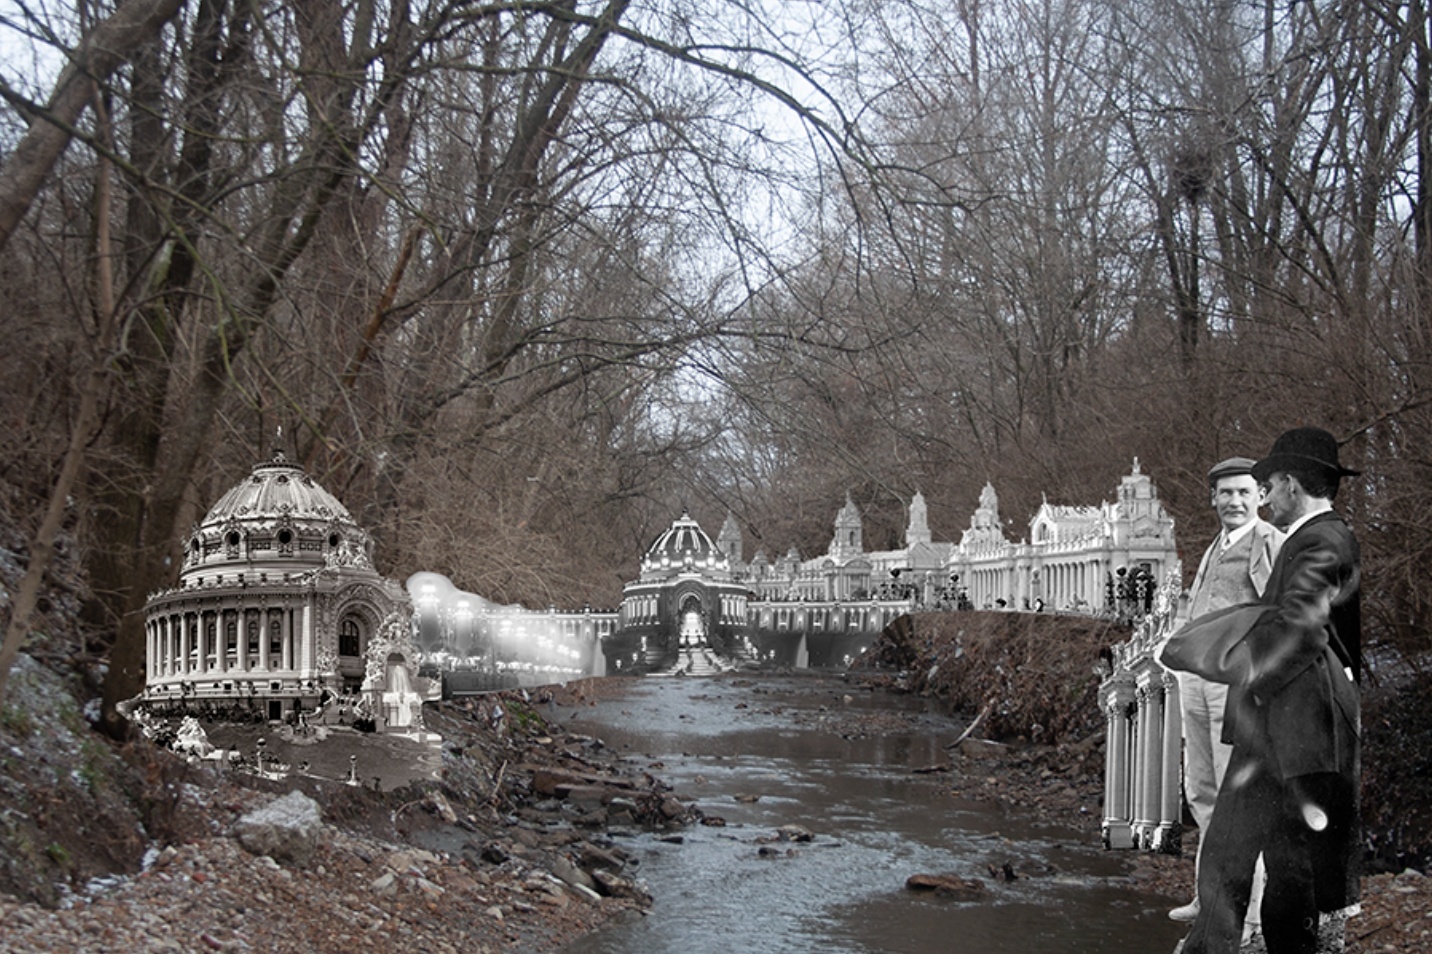 An image of a riverbed in winter overlaid with historical images of buildings and people from the 19th century.